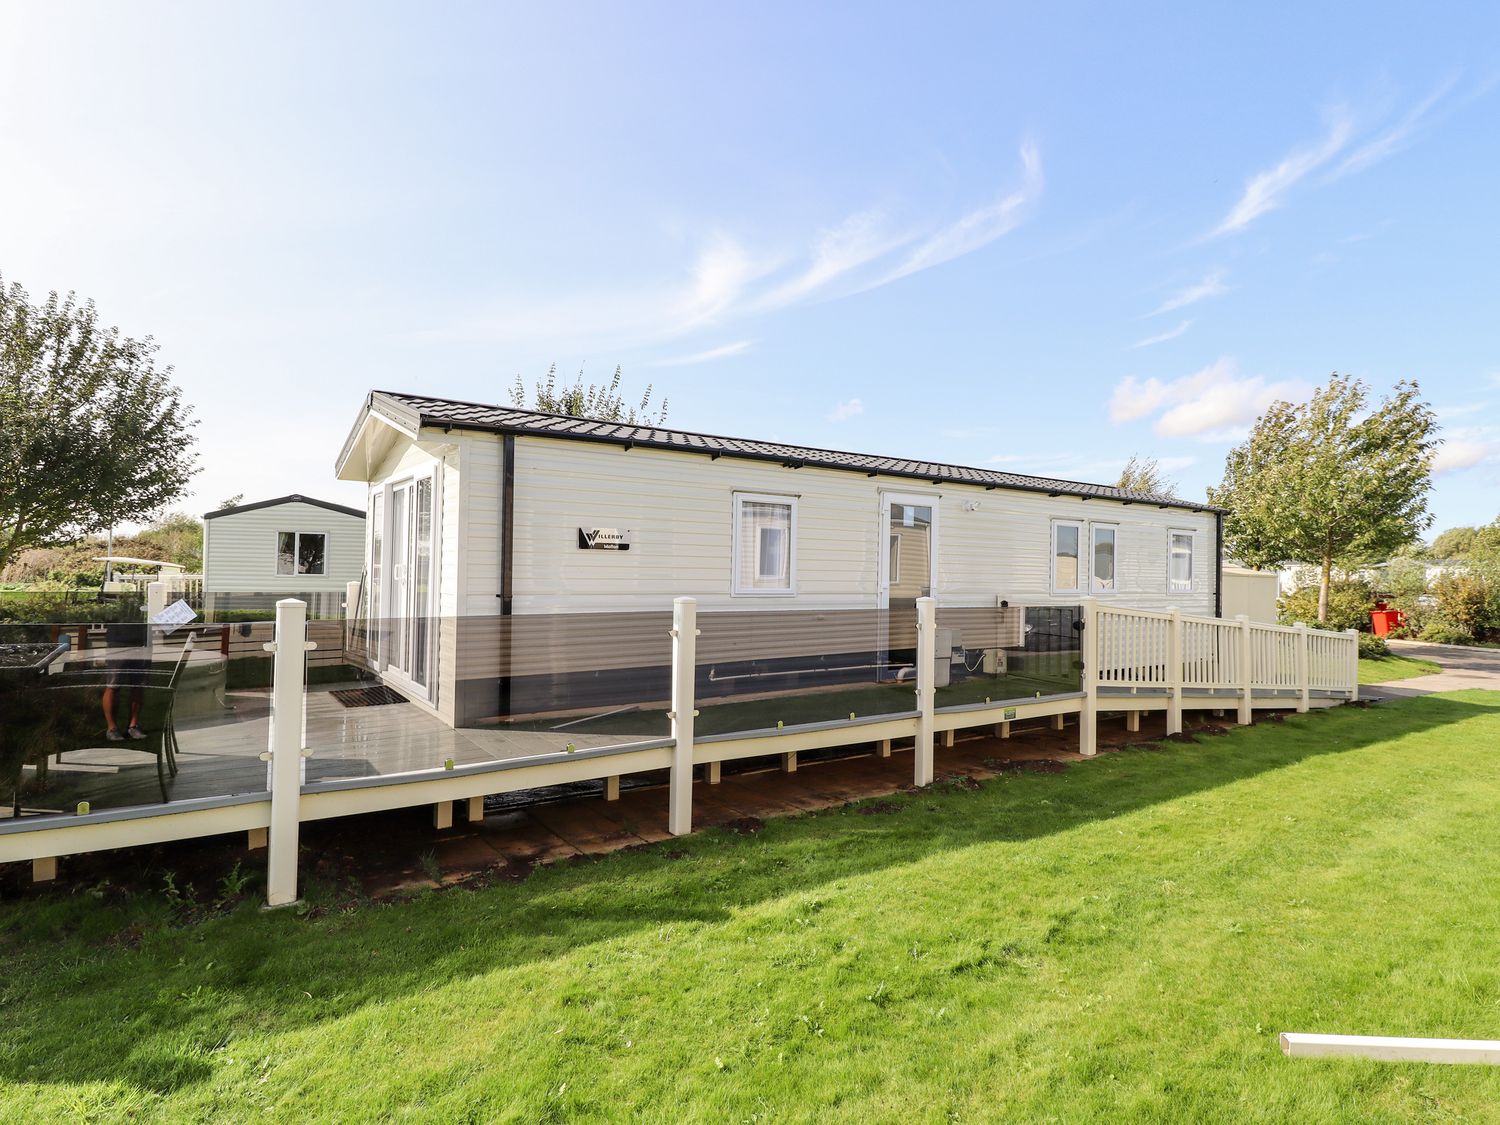 2 Kestrel Close, Tattershall, Lincolnshire. Two-bedroom lodge with hot tub. Close to lake and shops.